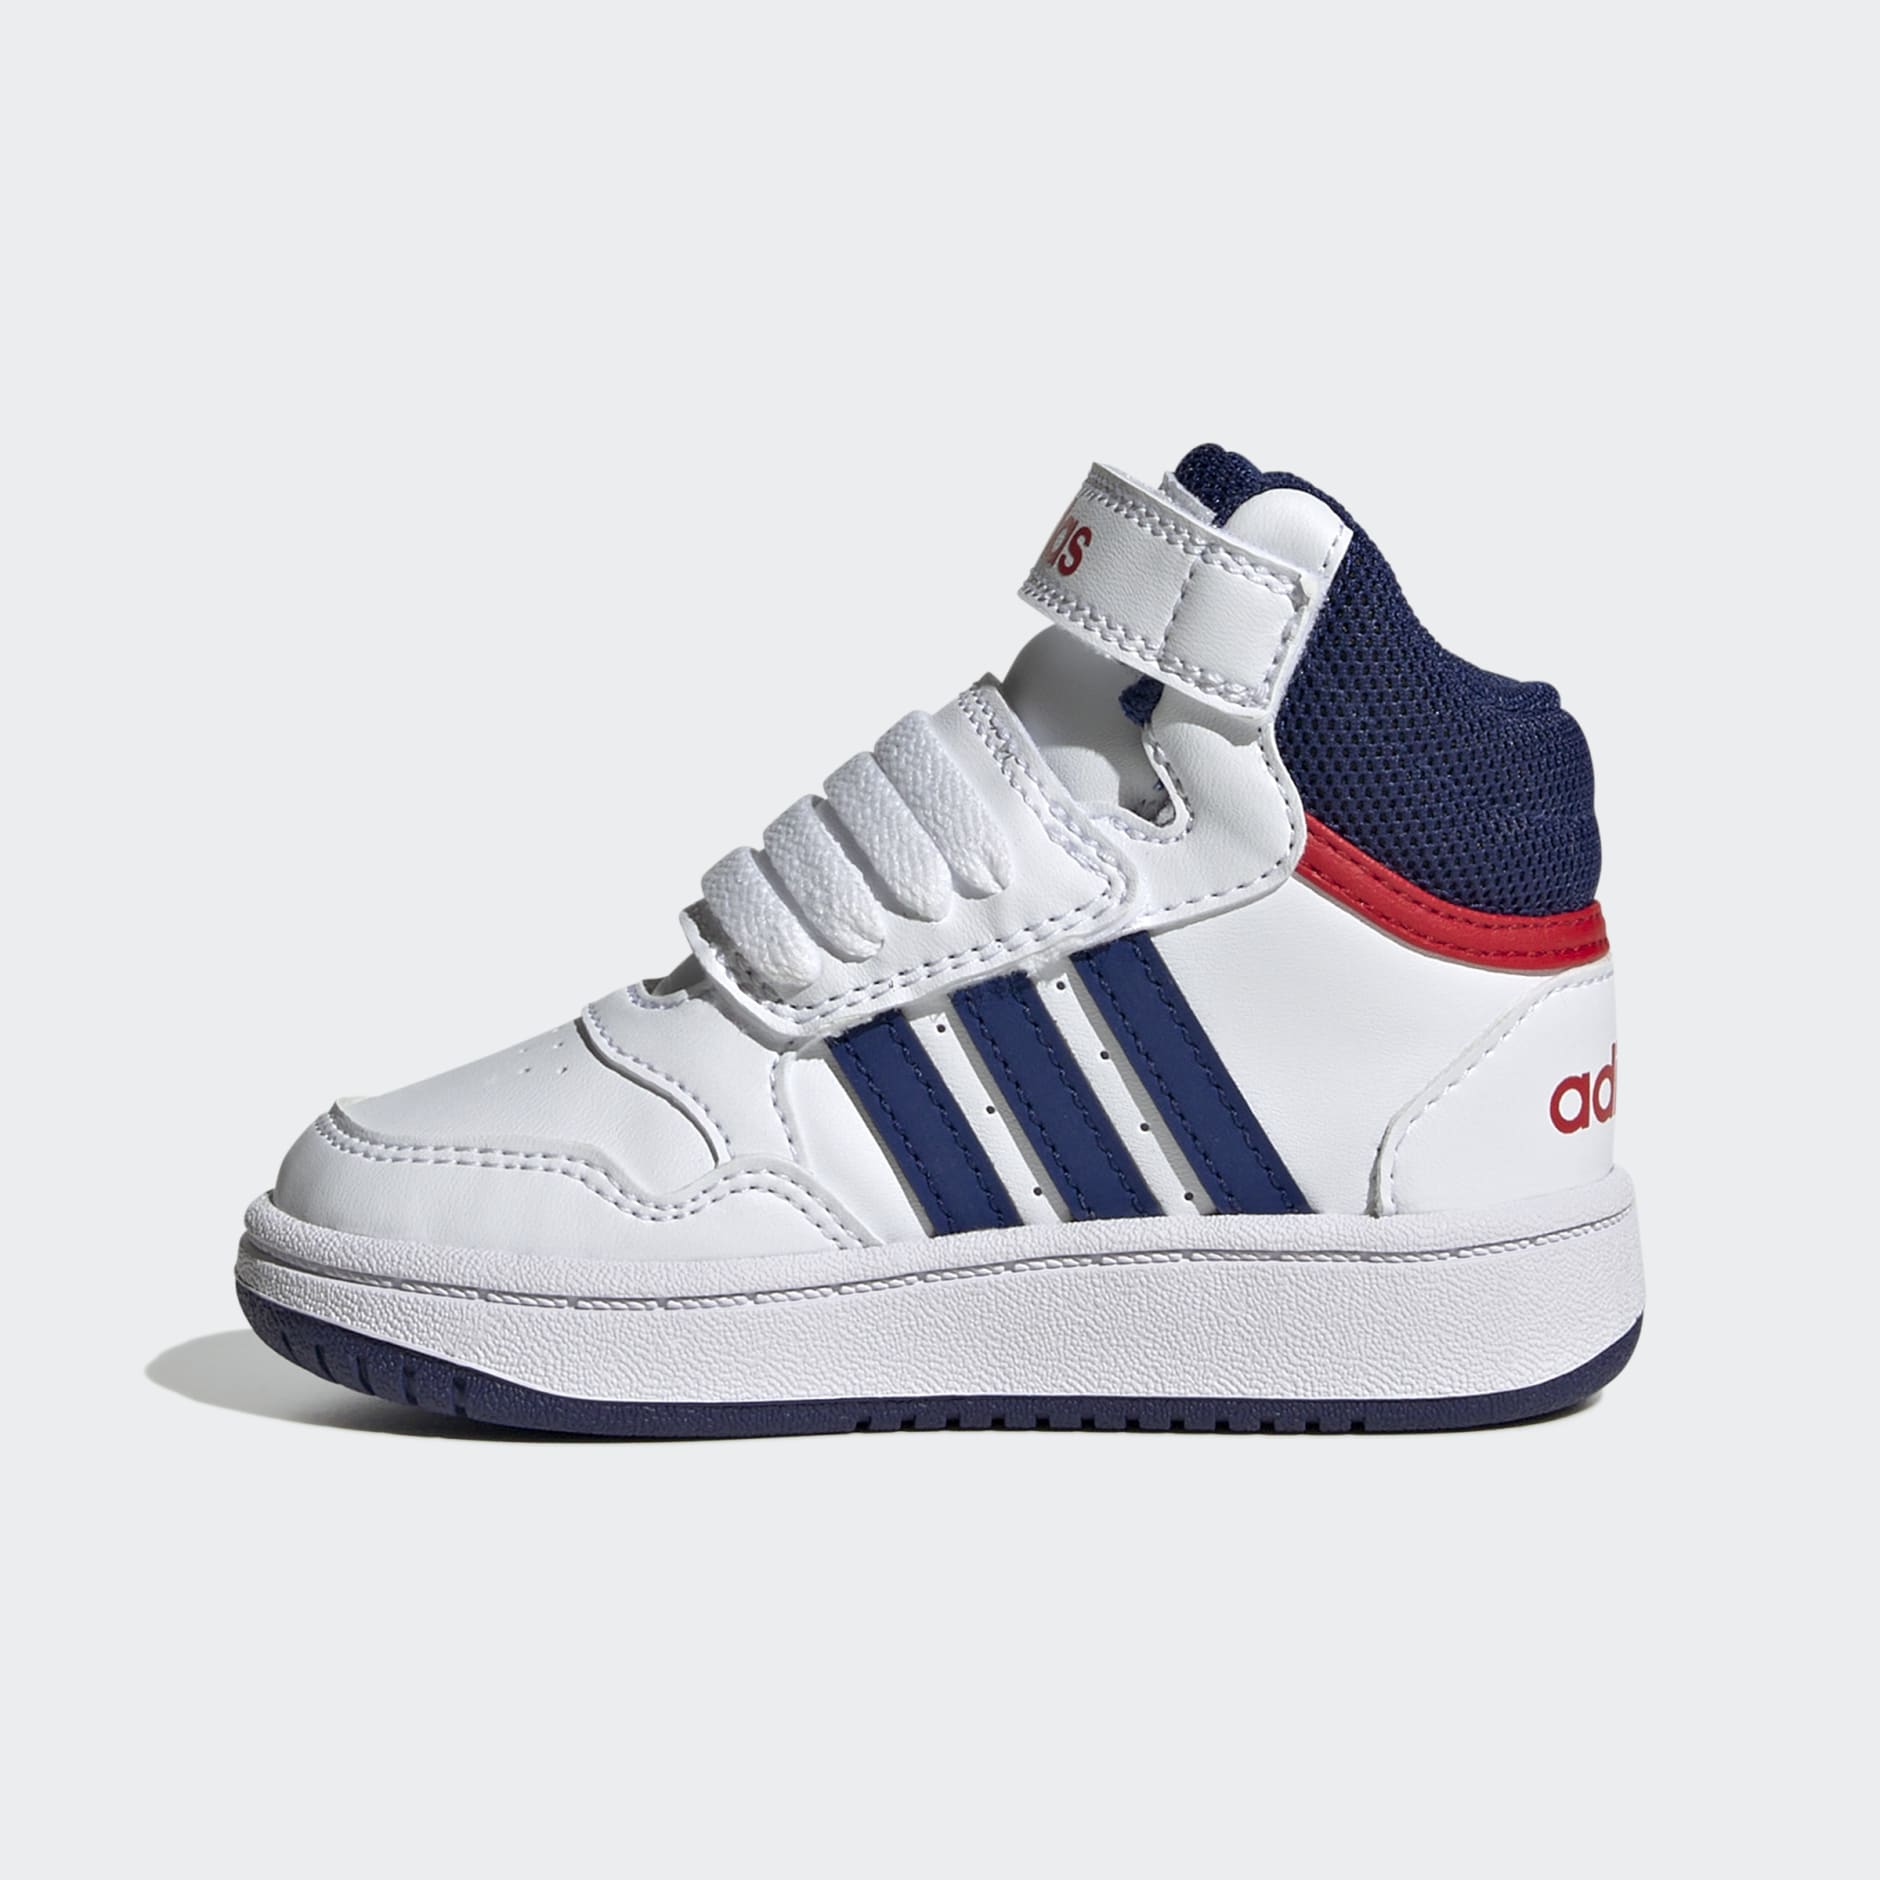 adidas Hoops Mid Shoes - White | adidas TZ